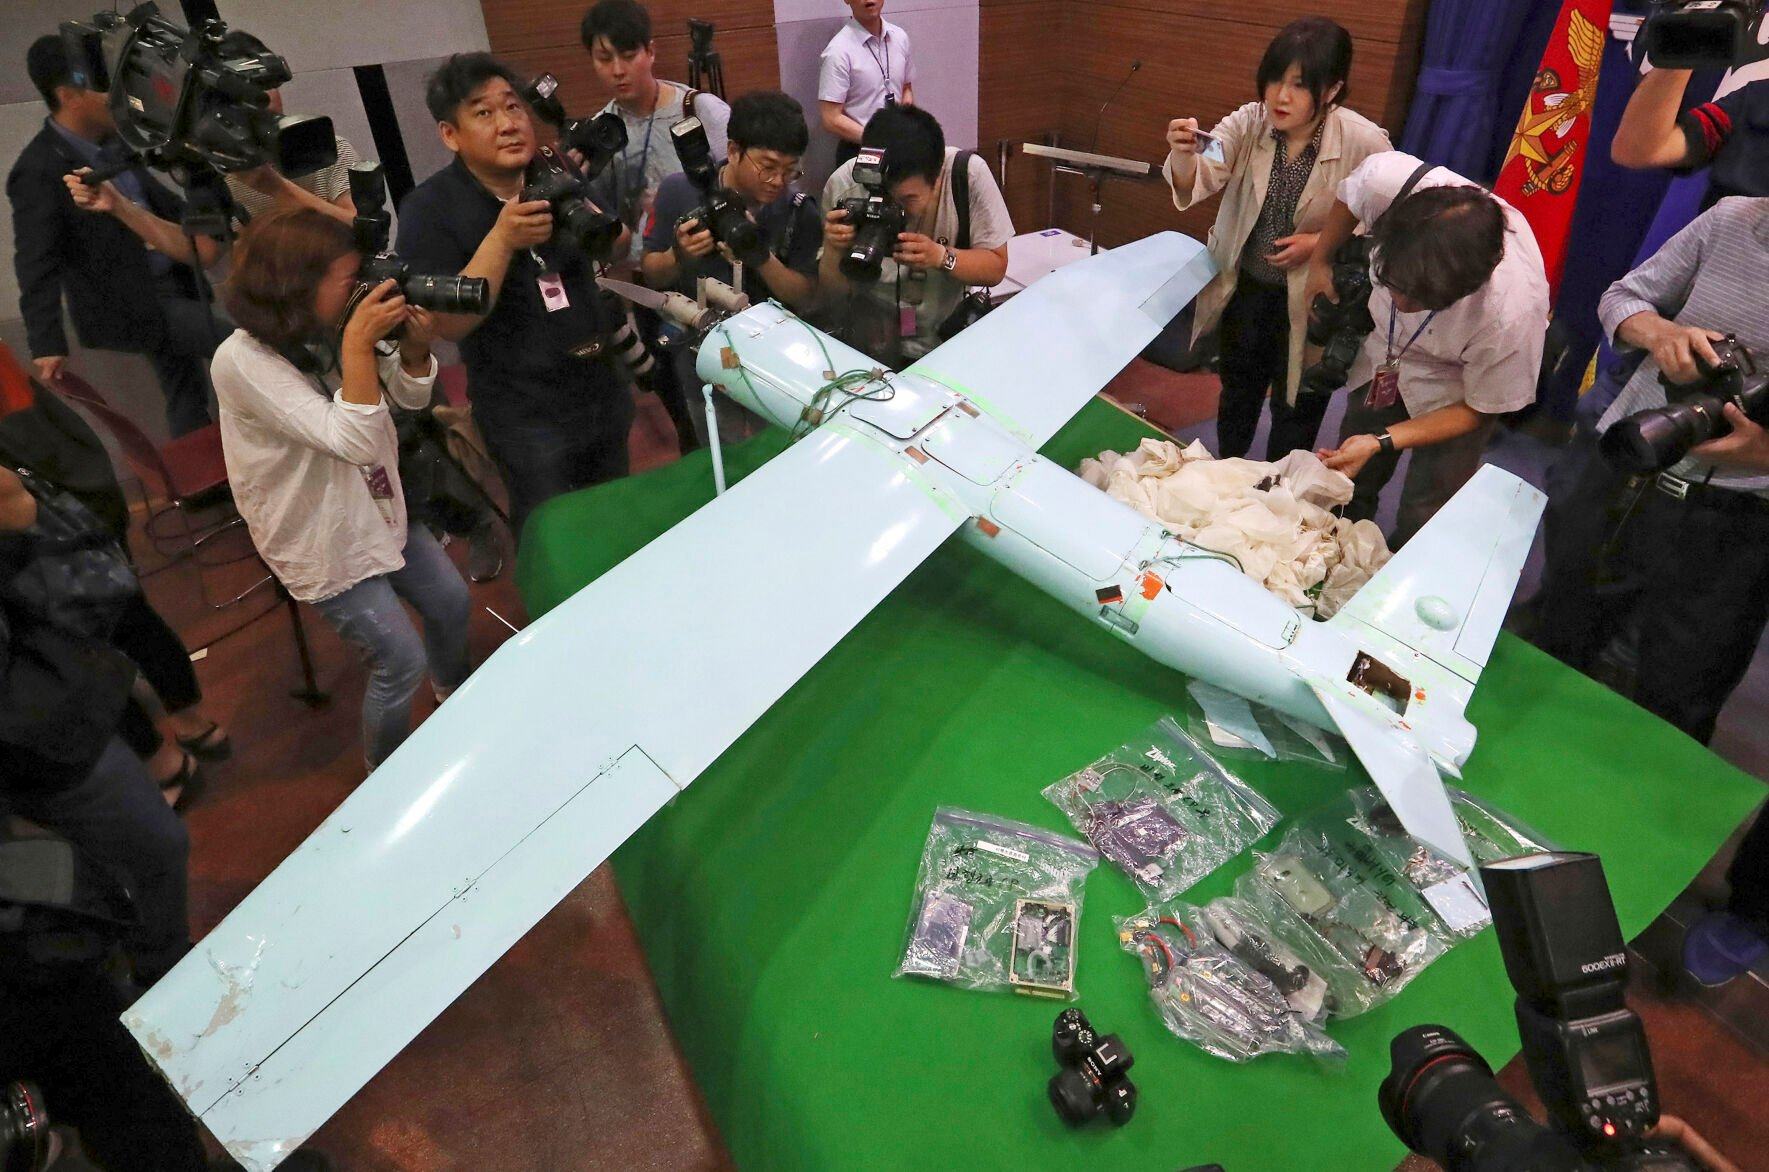 <p>FILE - A suspected North Korean drone is viewed at the Defense Ministry in Seoul, South Korea, on June 21, 2017. South Korea said Monday, Dec. 26, 2022, it fired warning shots after North Korean drones violated the South’s airspace. (Lee Jung-hoon/Yonhap via AP, File)</p>   PHOTO CREDIT: Lee Jung-hoon - foreign subscriber, Yonhap